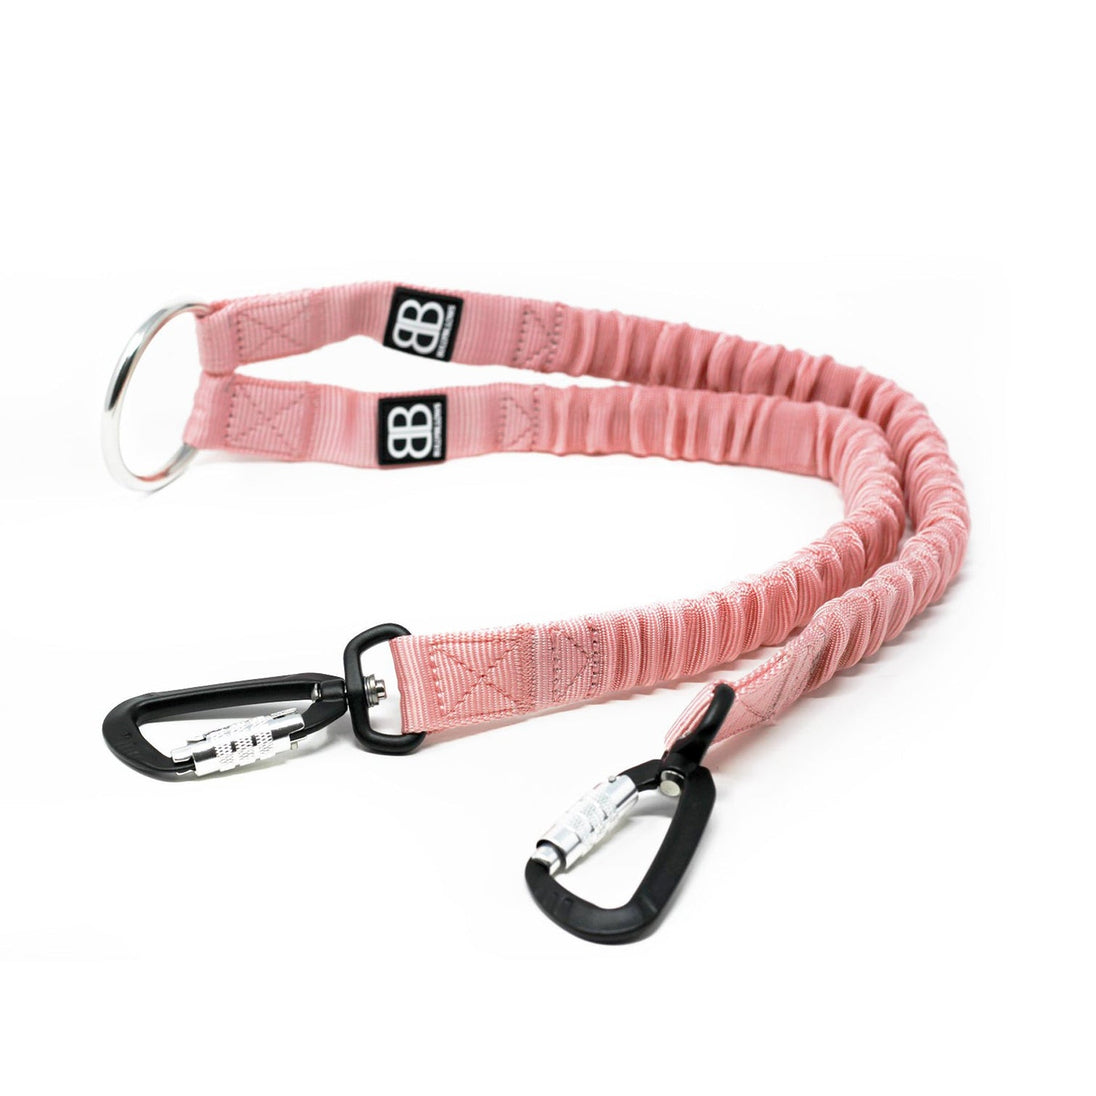 Bully Billows - Zero Shock Bungee Dog Lead - Pink - Bulletproof Pet Products Inc